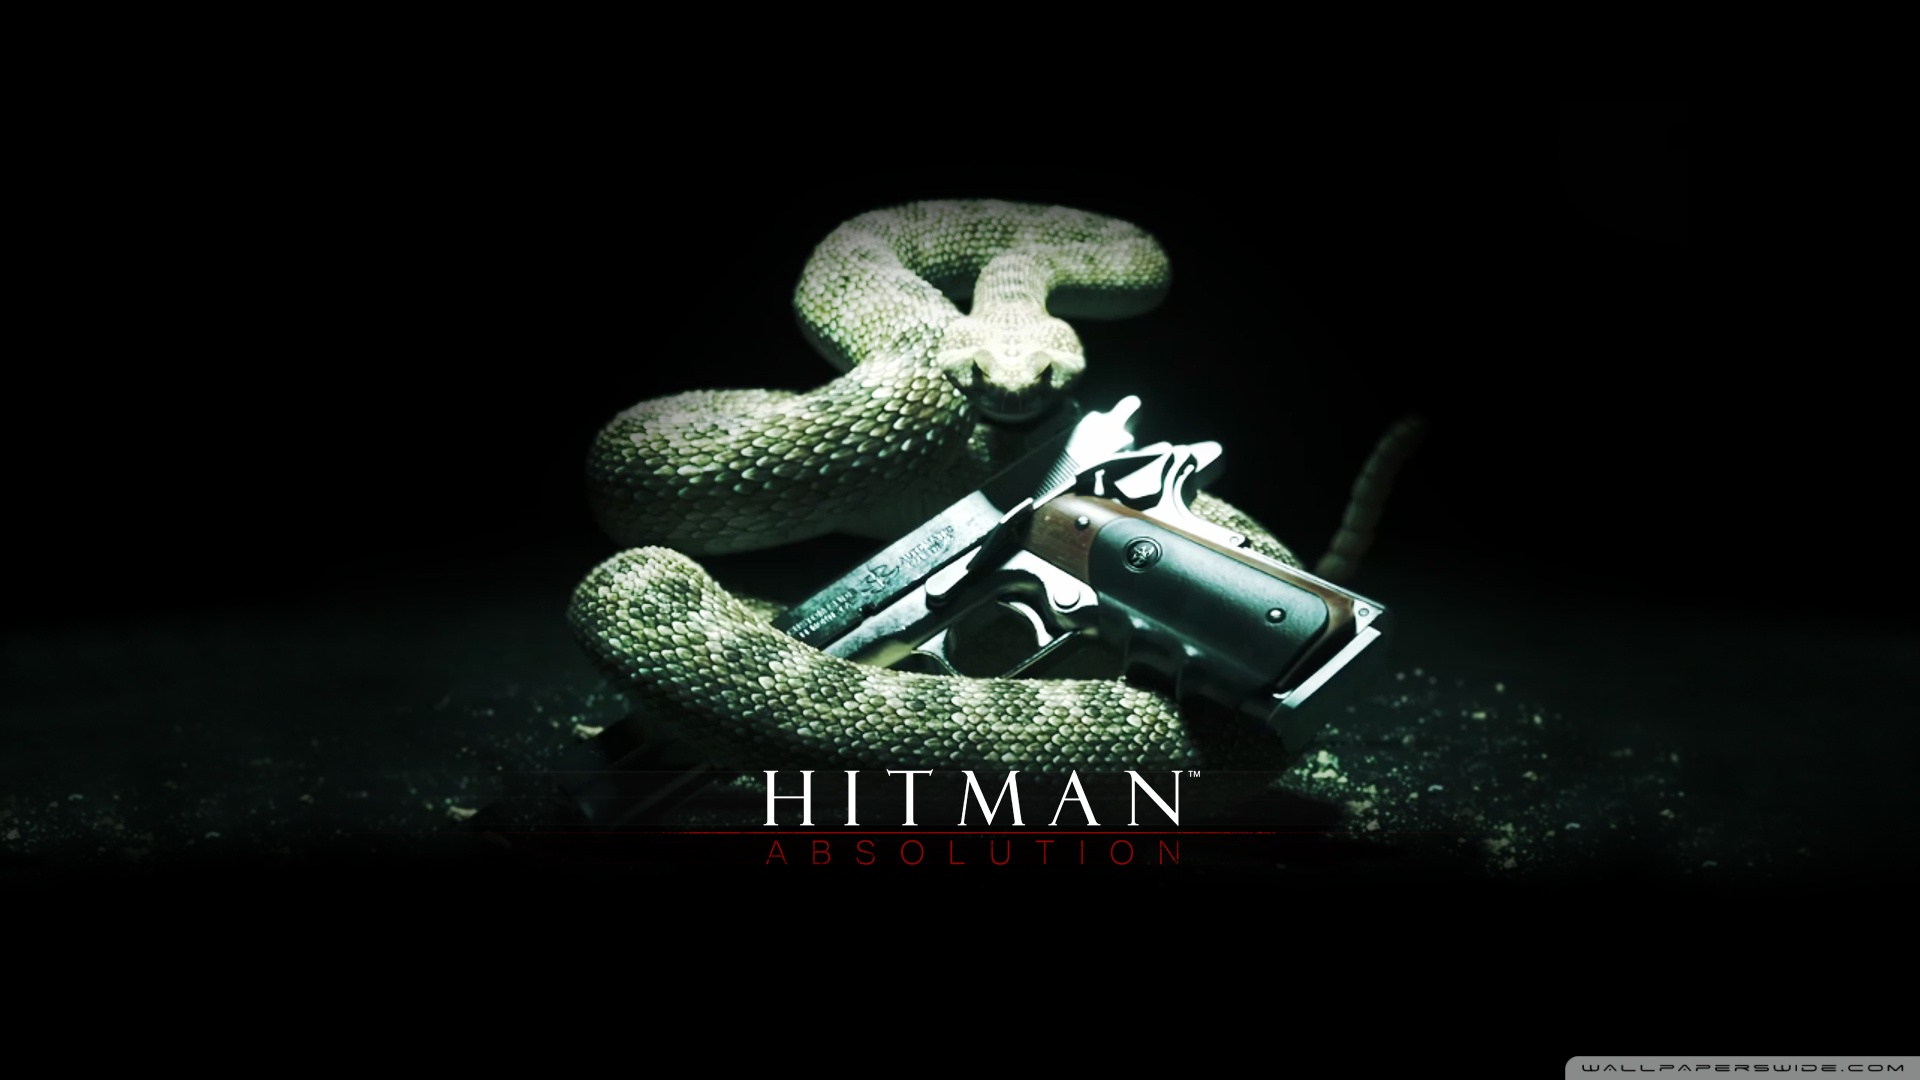 Link To Us Ps3 Mmgn News Hitman Absolution Wallpaper